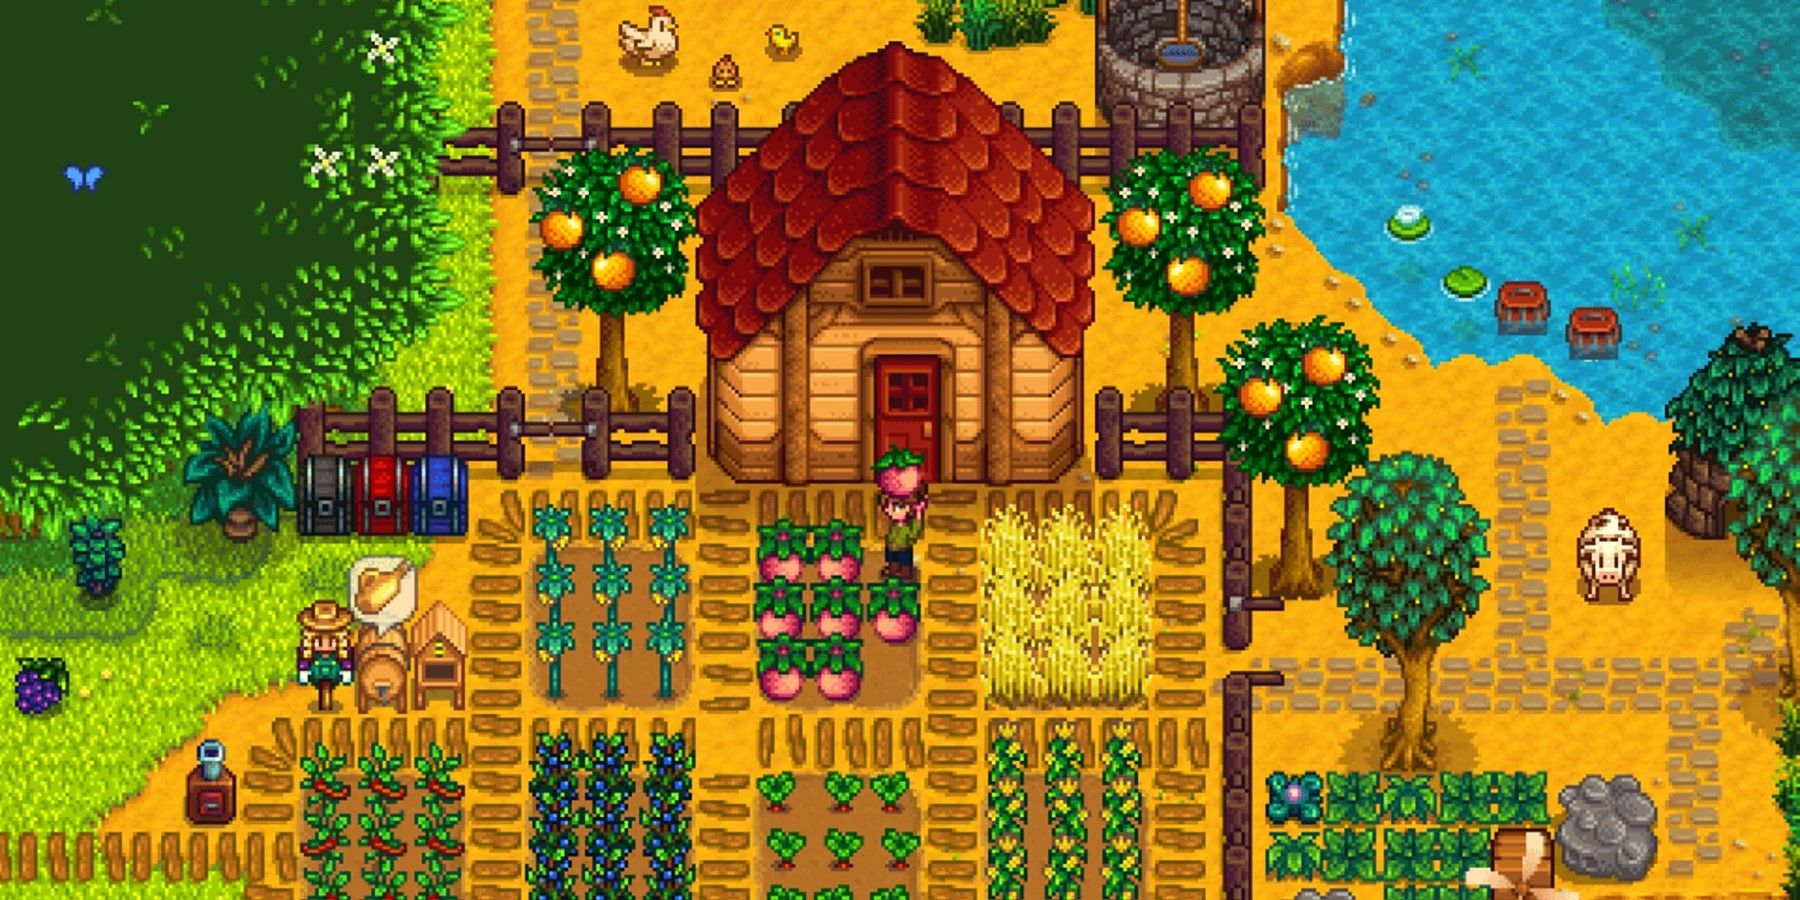 Stardew Valley 1.6 update - Release date, patch notes, and more